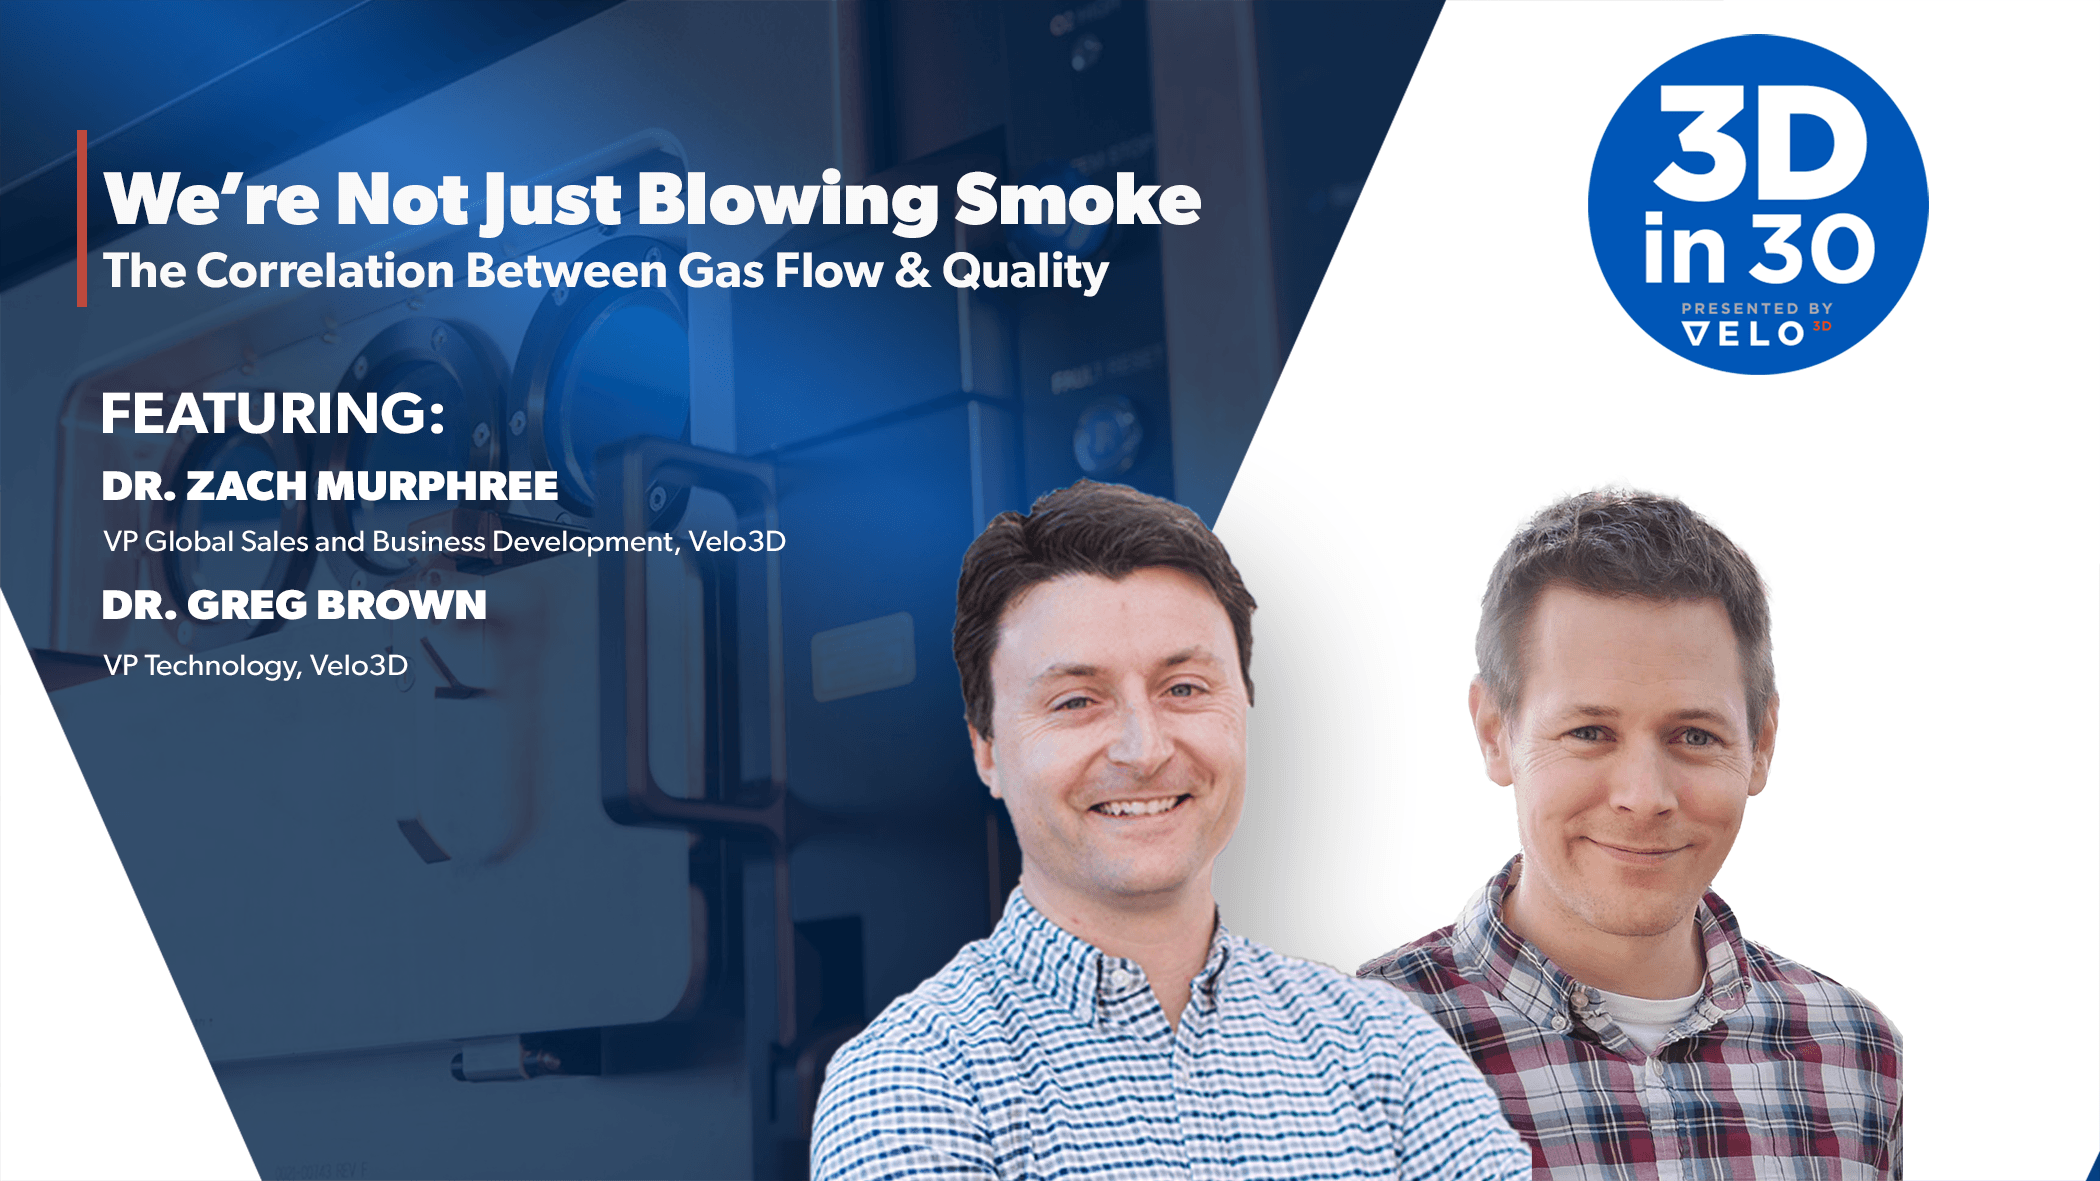 We’re Not Just Blowing Smoke